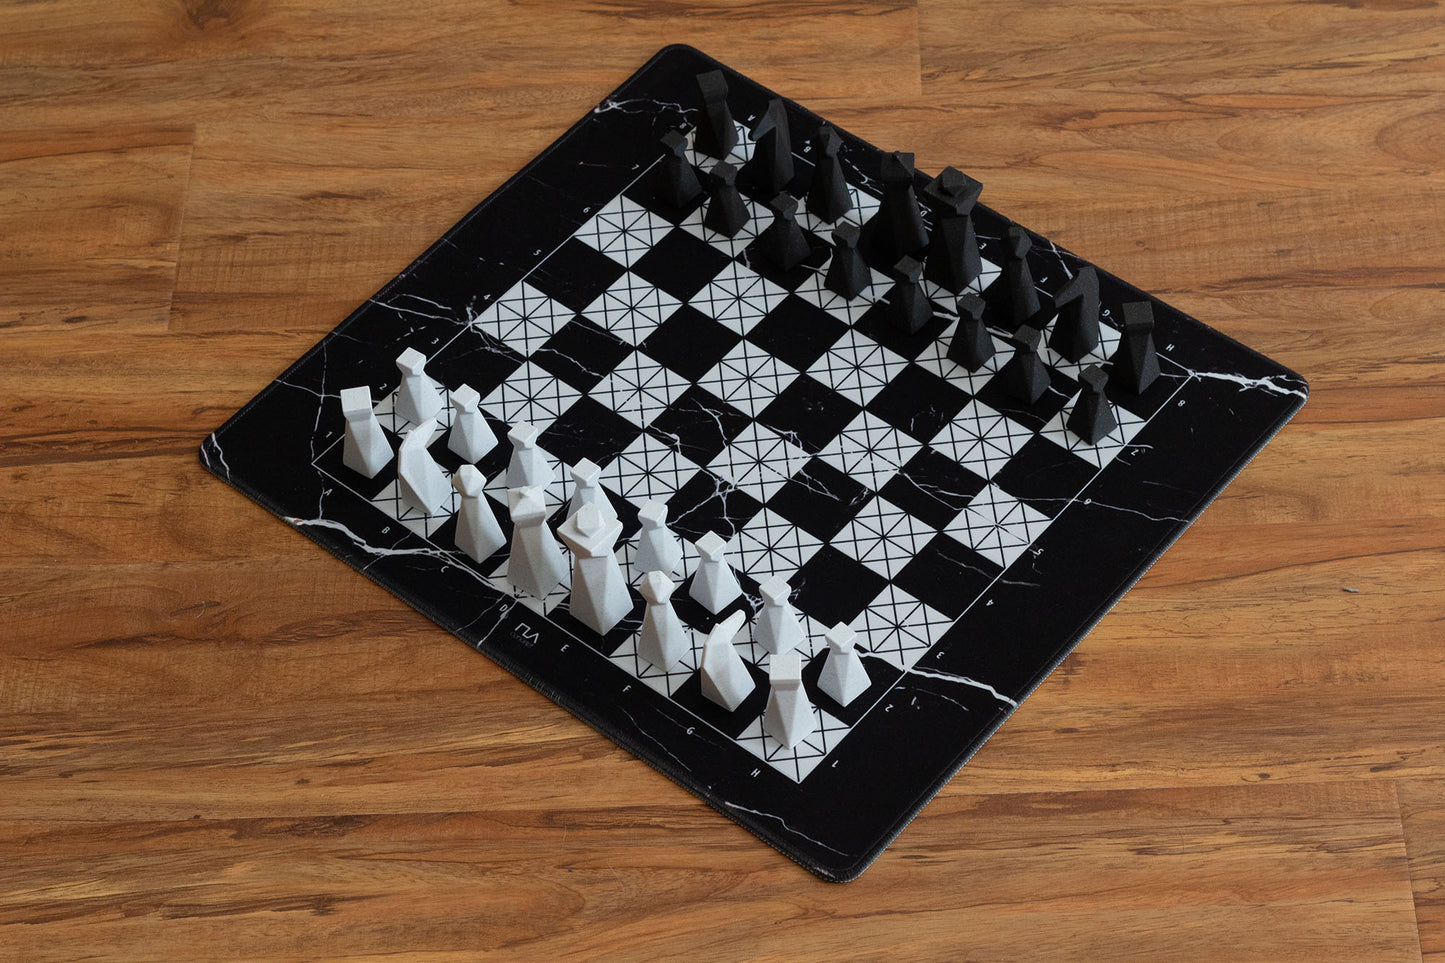 Roll-Up Chess Set